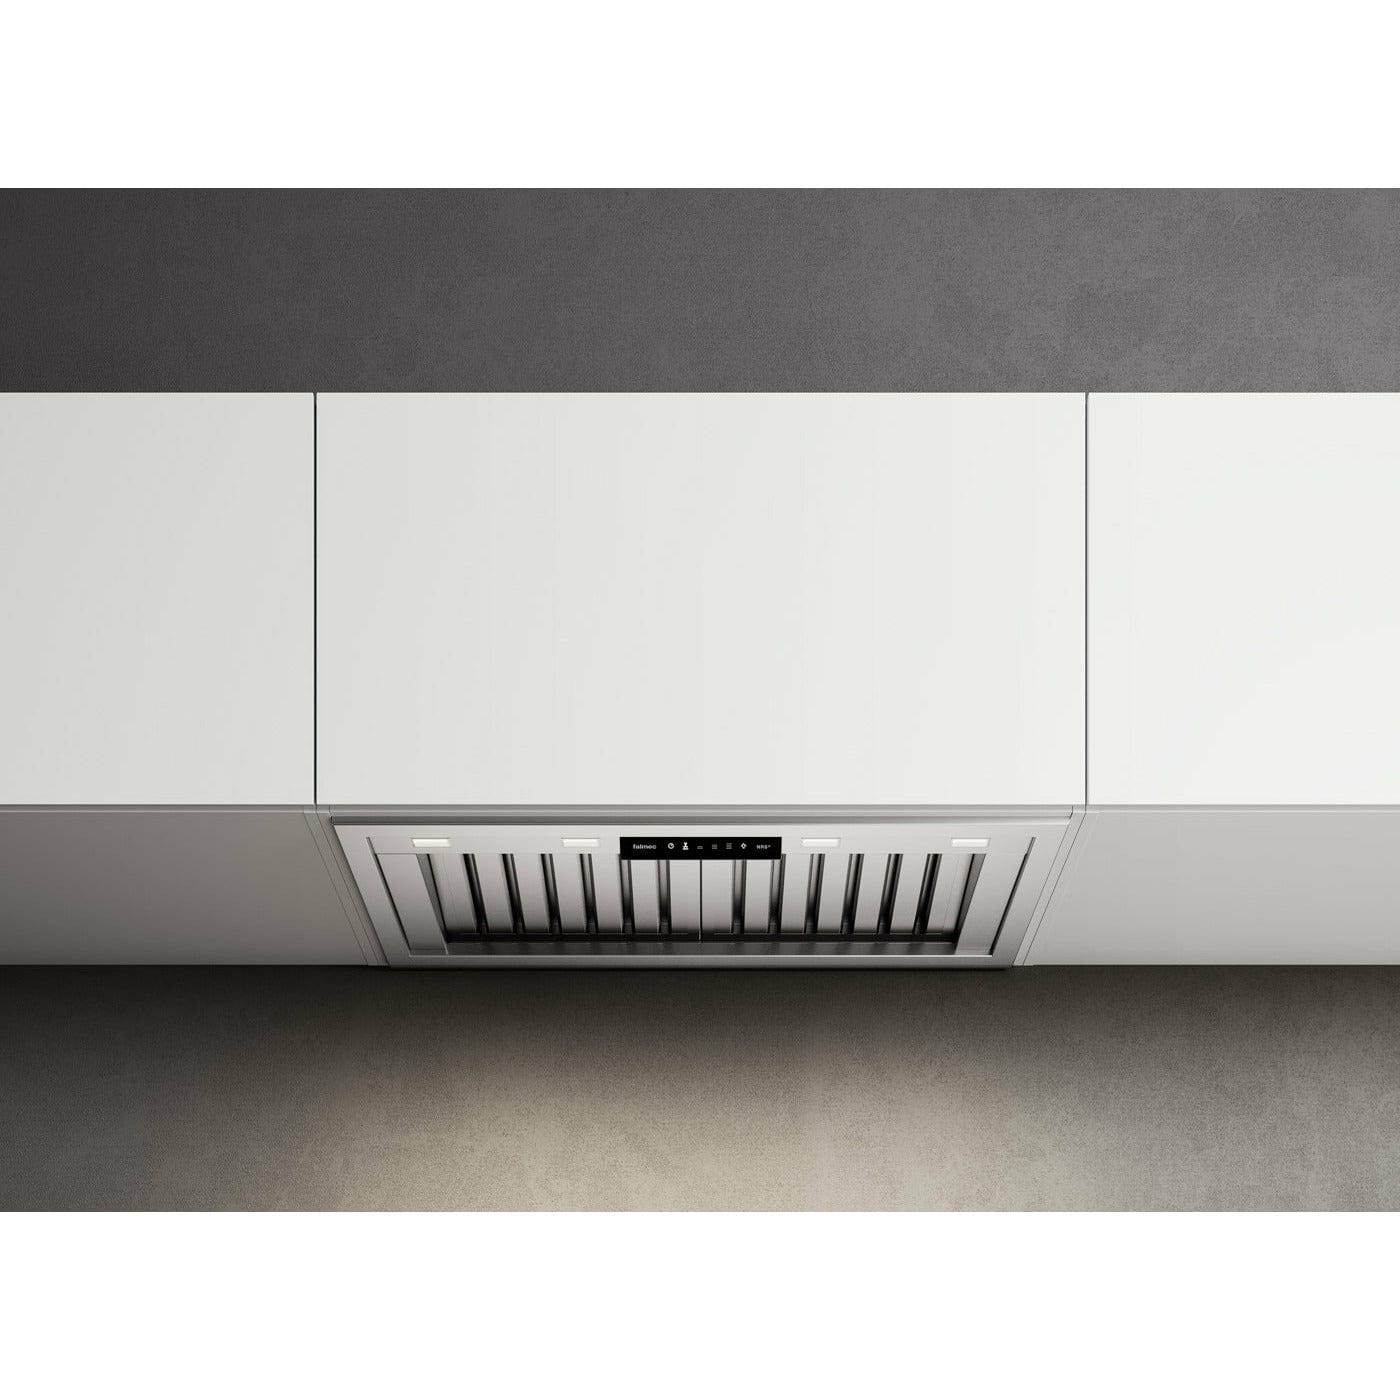 Falmec Massimo Pro 30"/76cm NRS Insert, 600 CFM NRS technology for a quieter kitchen, Touch control + 24 h function FNMAS30W6SS Range Hoods FNMAS30W6SS Luxury Appliances Direct